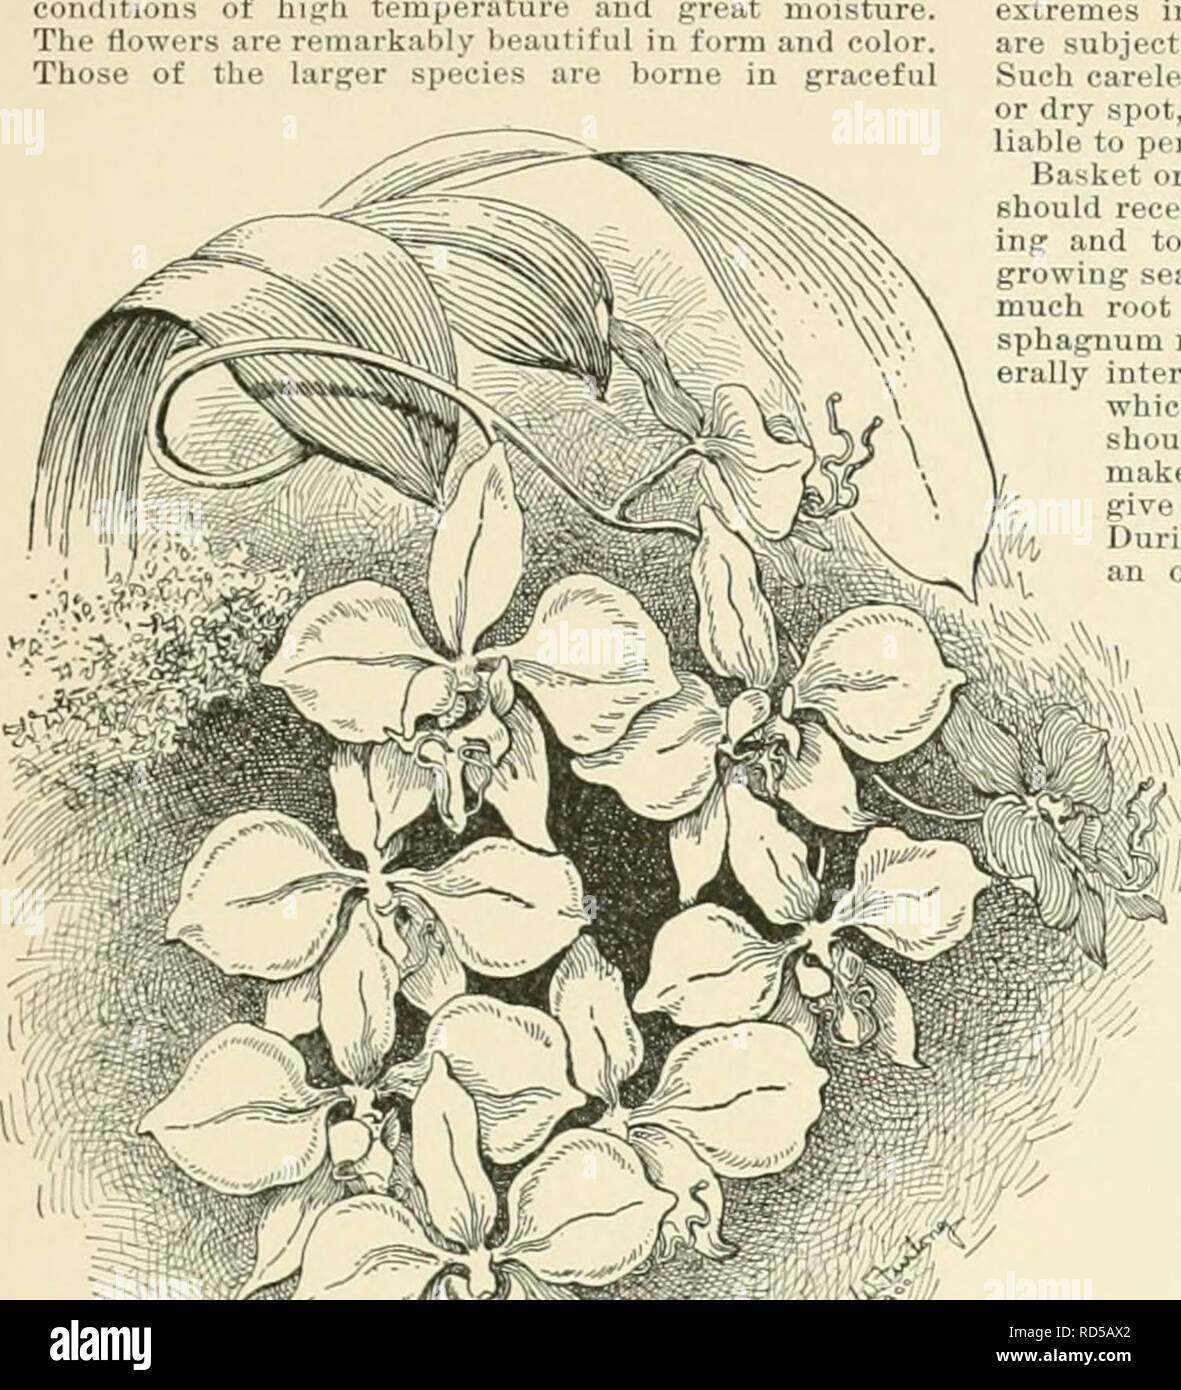 . Cyclopedia of American horticulture, comprising suggestions for cultivation of horticultural plants, descriptions of the species of fruits, vegetables, flowers, and ornamental plants sold in the United States and Canada, together with geographical and biographical sketches. Gardening. PHAL^NOPSIS to be found in the oichid famih The plants are natives of the hot legions of India and the Malaj Aichipelago, gioninj; on tiunks of tiees and bides of rocks under leratuie and great moisture. ikibh heautiful m form and color. r sp( Lies aie borne in graceful PHAL.ENOPSIS 1291. exclude indirect solar Stock Photo